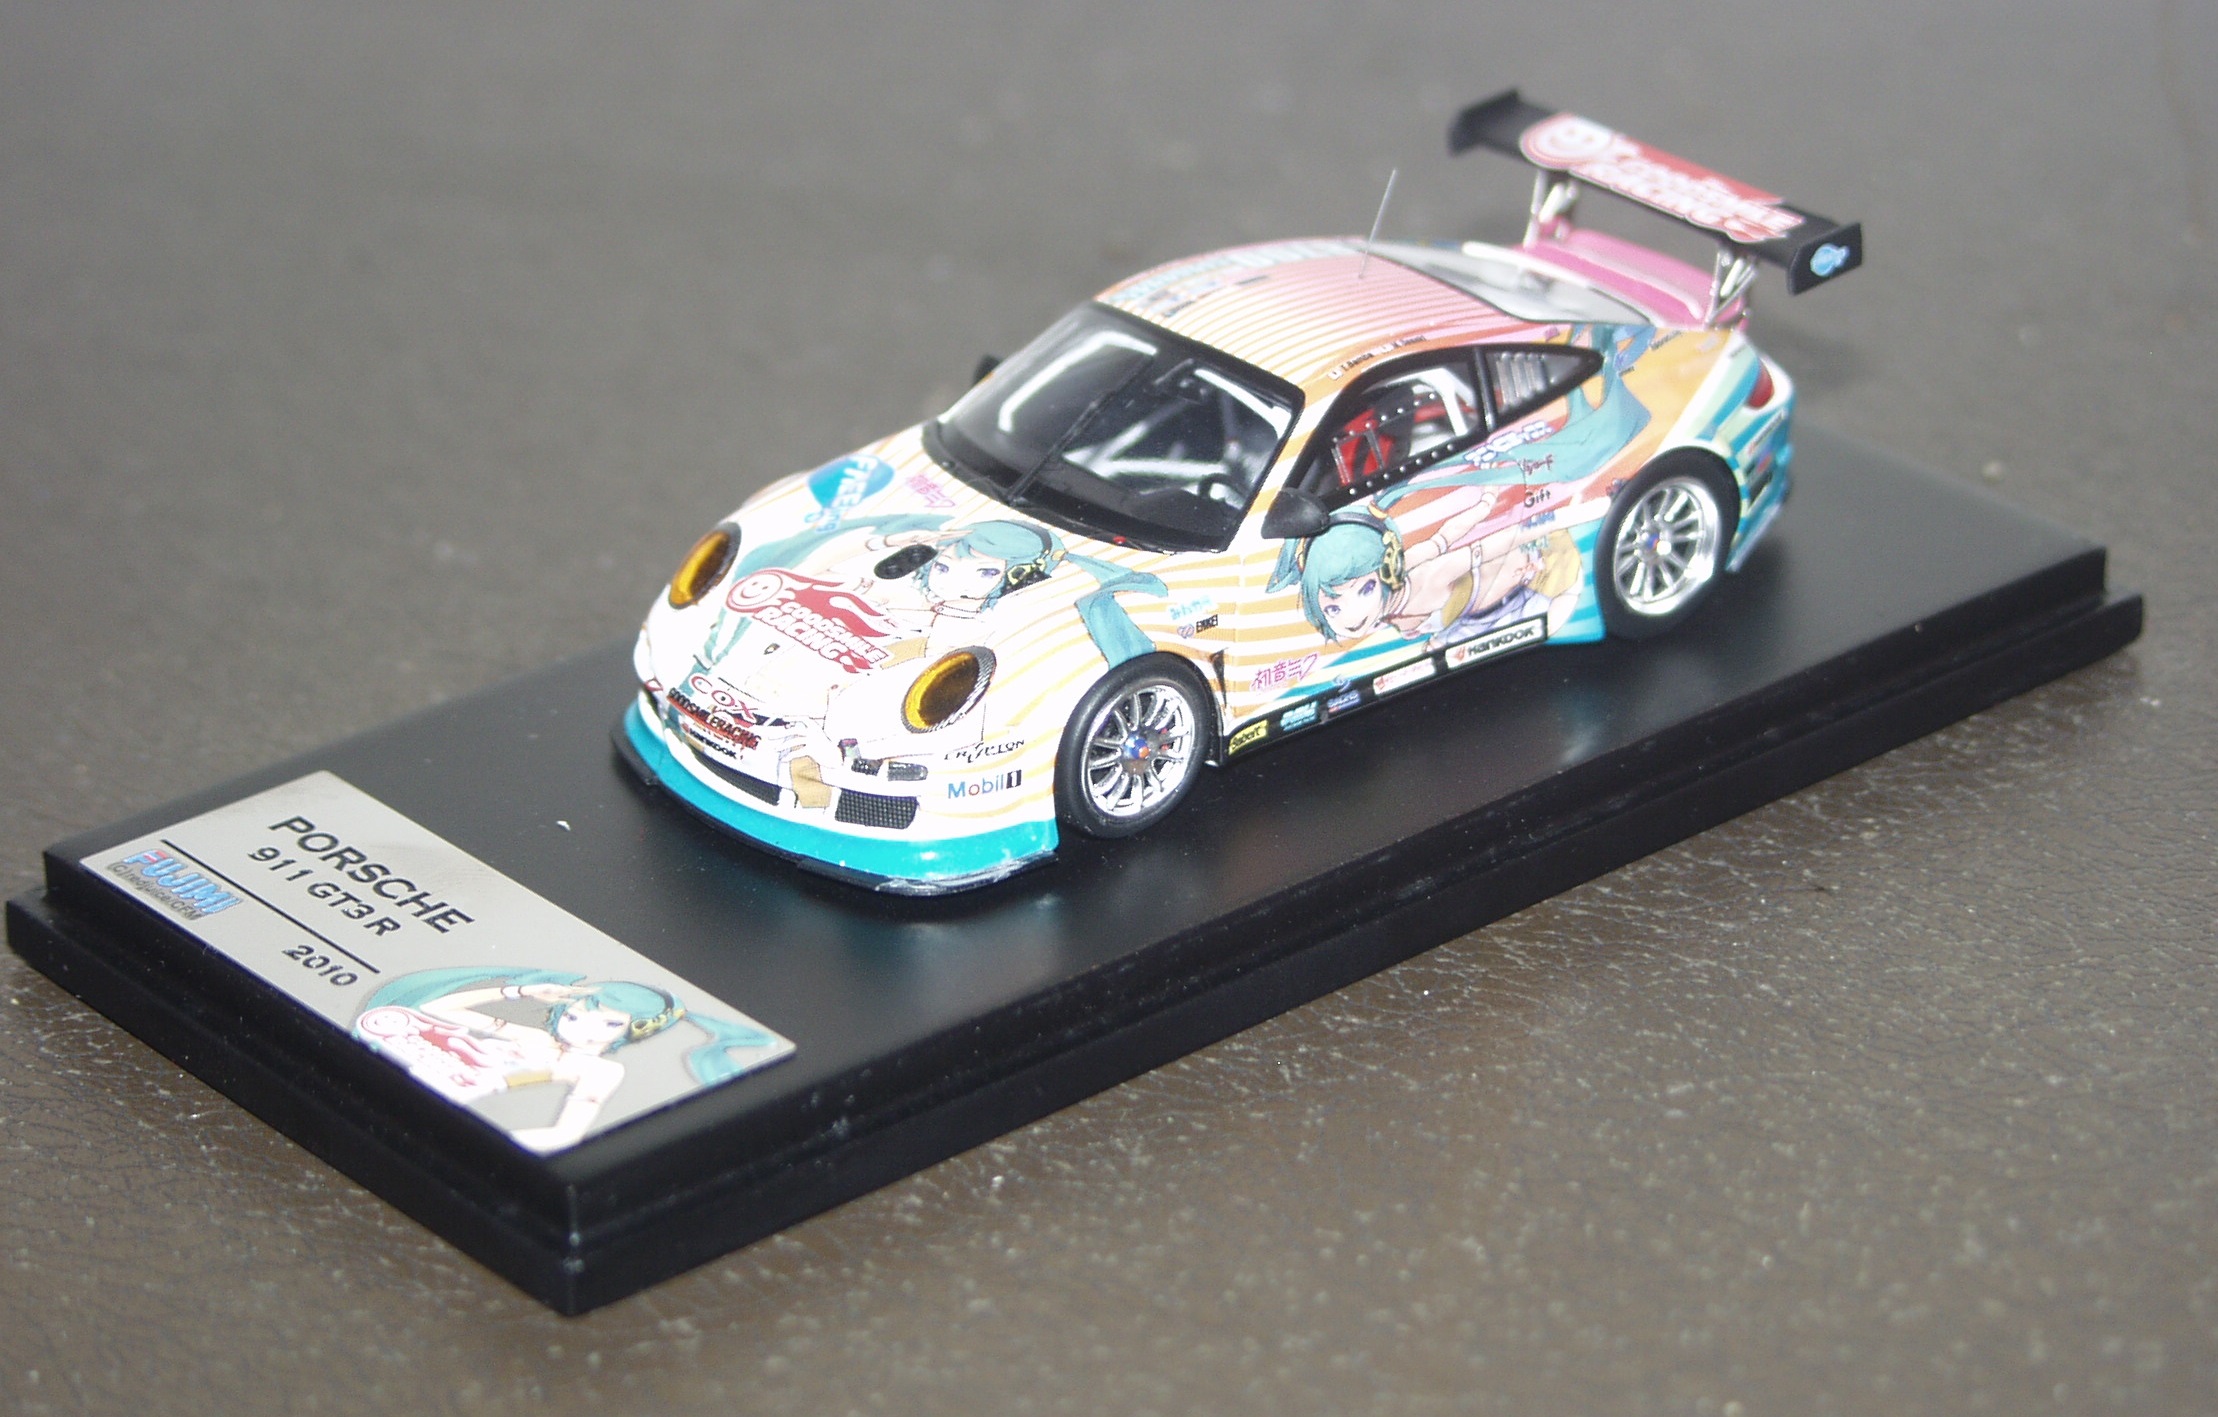 Pics of your models, please! - Page 149 - Scale Models - PistonHeads